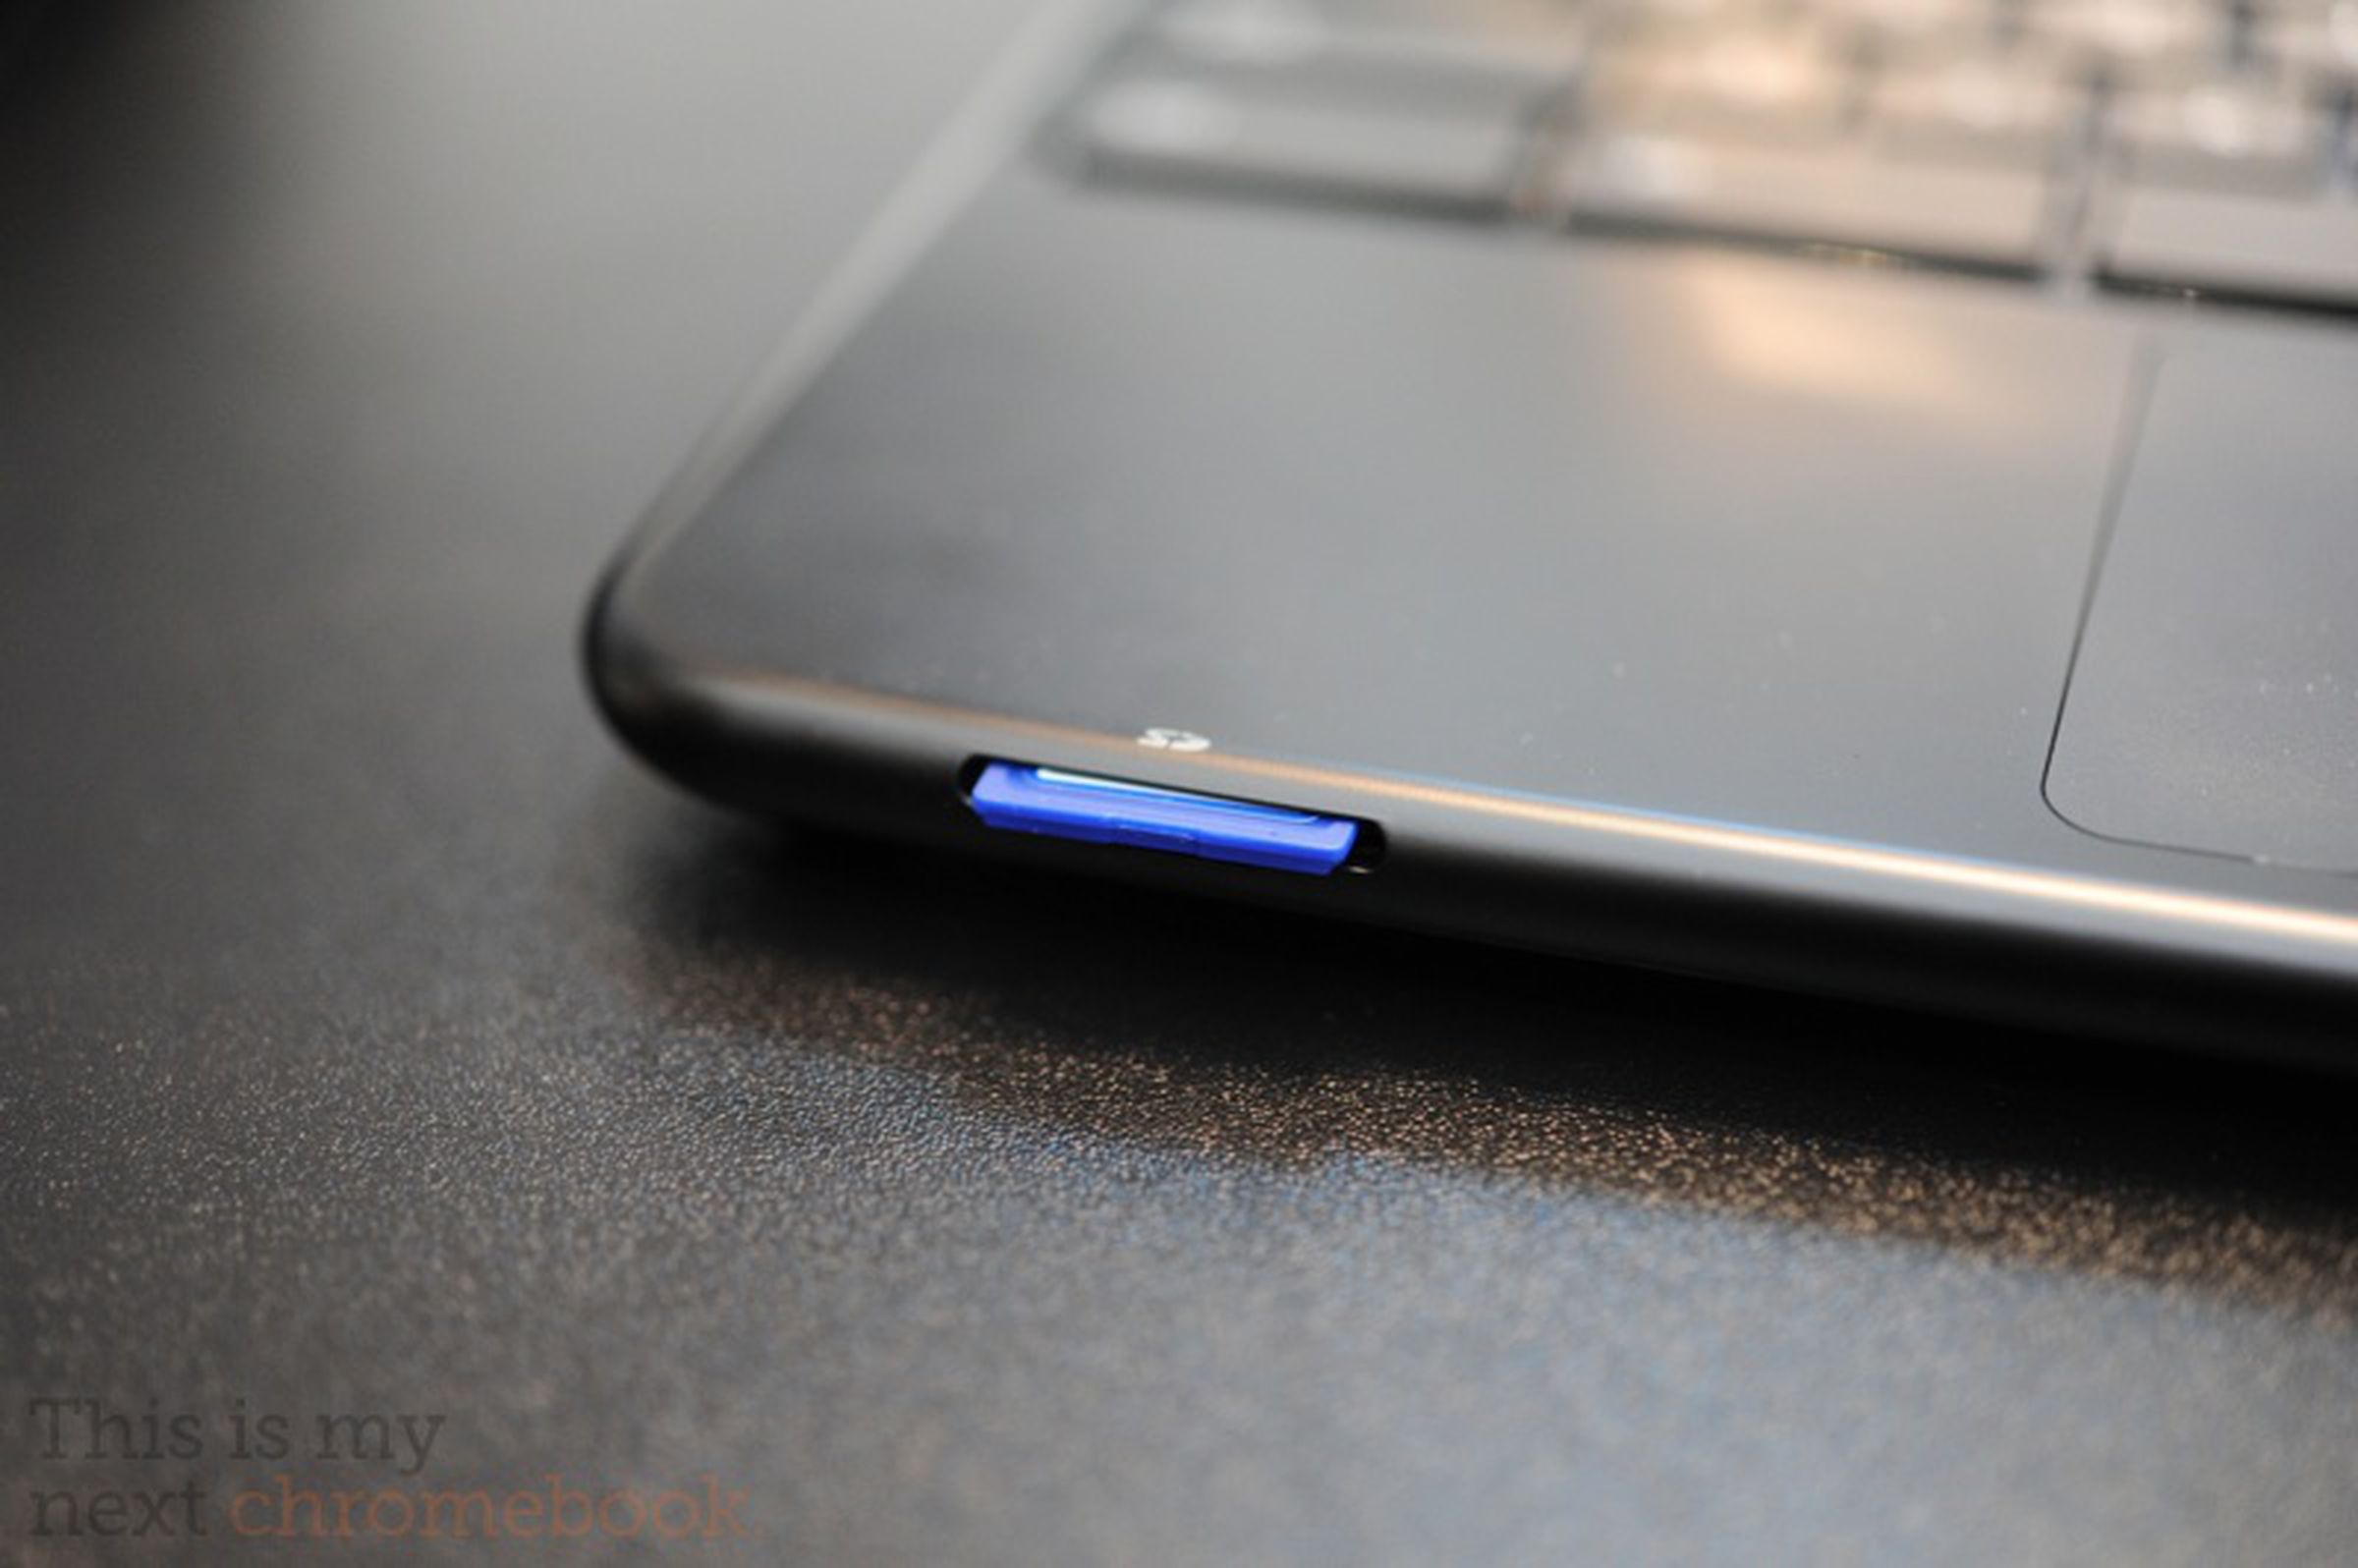 Samsung Series 5 Chromebook hands-on pictures